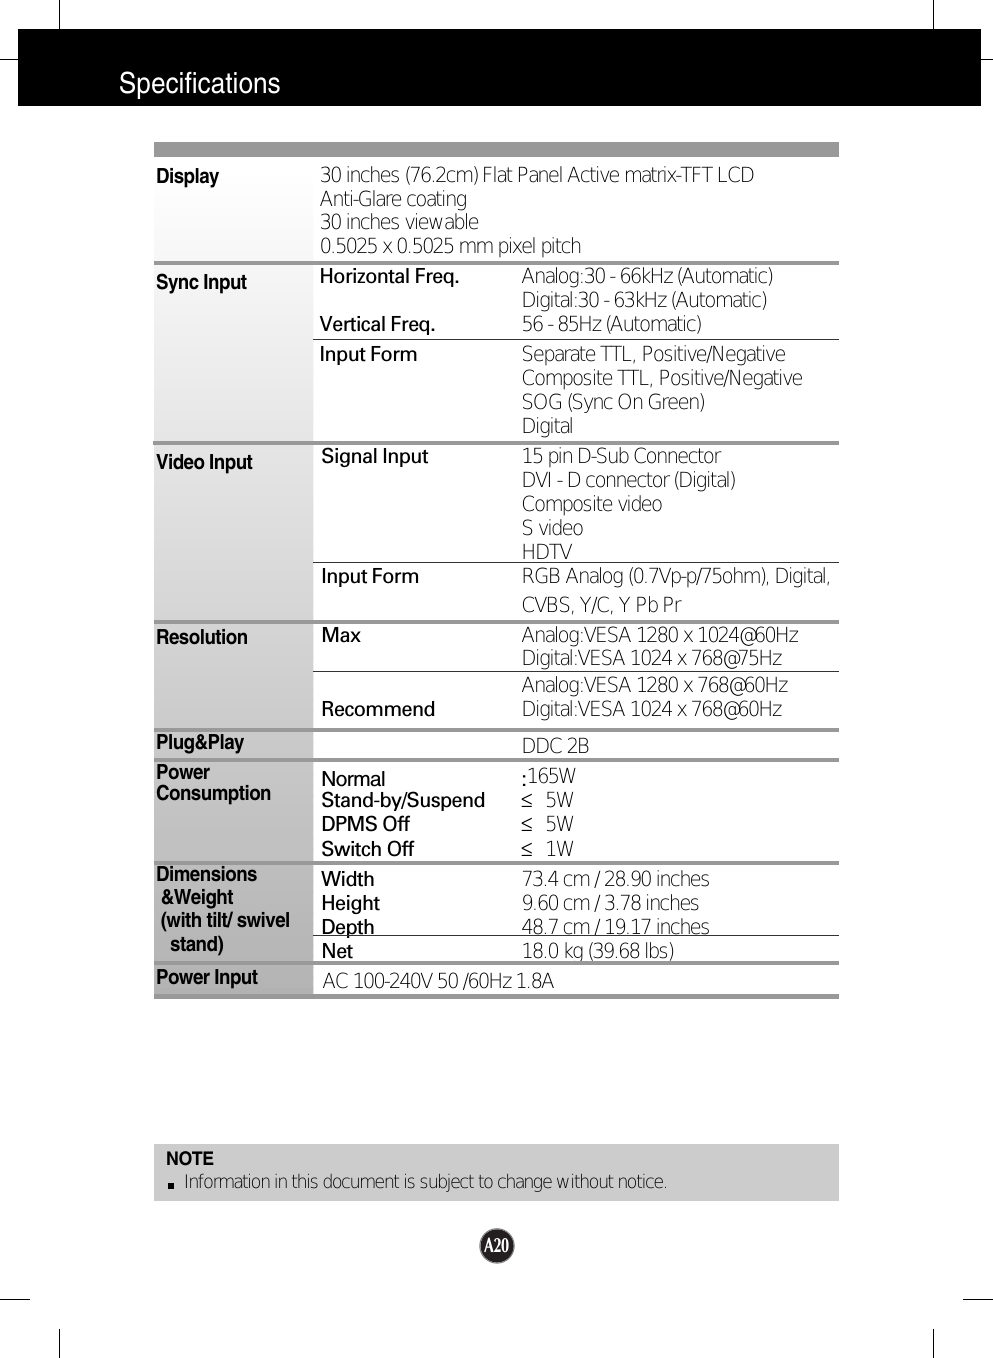 A20SpecificationsNOTEInformation in this document is subject to change without notice.30 inches (76.2cm) Flat Panel Active matrix-TFT LCD Anti-Glare coating30 inches viewable0.5025 x 0.5025 mm pixel pitchHorizontal Freq. Analog:30 - 66kHz (Automatic)Digital:30 - 63kHz (Automatic)Vertical Freq. 56 - 85Hz (Automatic)Input Form Separate TTL, Positive/NegativeComposite TTL, Positive/NegativeSOG (Sync On Green) DigitalSignal Input 15 pin D-Sub ConnectorDVI - D connector (Digital)Composite videoS videoHDTVInput Form RGB Analog (0.7Vp-p/75ohm), Digital,CVBS, Y/C, Y Pb PrMax Analog:VESA 1280 x 1024@60HzDigital:VESA 1024 x 768@75HzAnalog:VESA 1280 x 768@60HzRecommend Digital:VESA 1024 x 768@60HzDDC 2BNormal :165WStand-by/Suspend ≤5WDPMS Off ≤5WSwitch Off ≤1WWidth 73.4 cm / 28.90 inchesHeight 9.60 cm / 3.78 inchesDepth 48.7 cm / 19.17 inchesNet 18.0 kg (39.68 lbs)AC 100-240V 50 /60Hz 1.8ADisplaySync InputVideo InputResolutionPlug&amp;PlayPowerConsumptionDimensions&amp;Weight(with tilt/ swivel       stand)Power Input